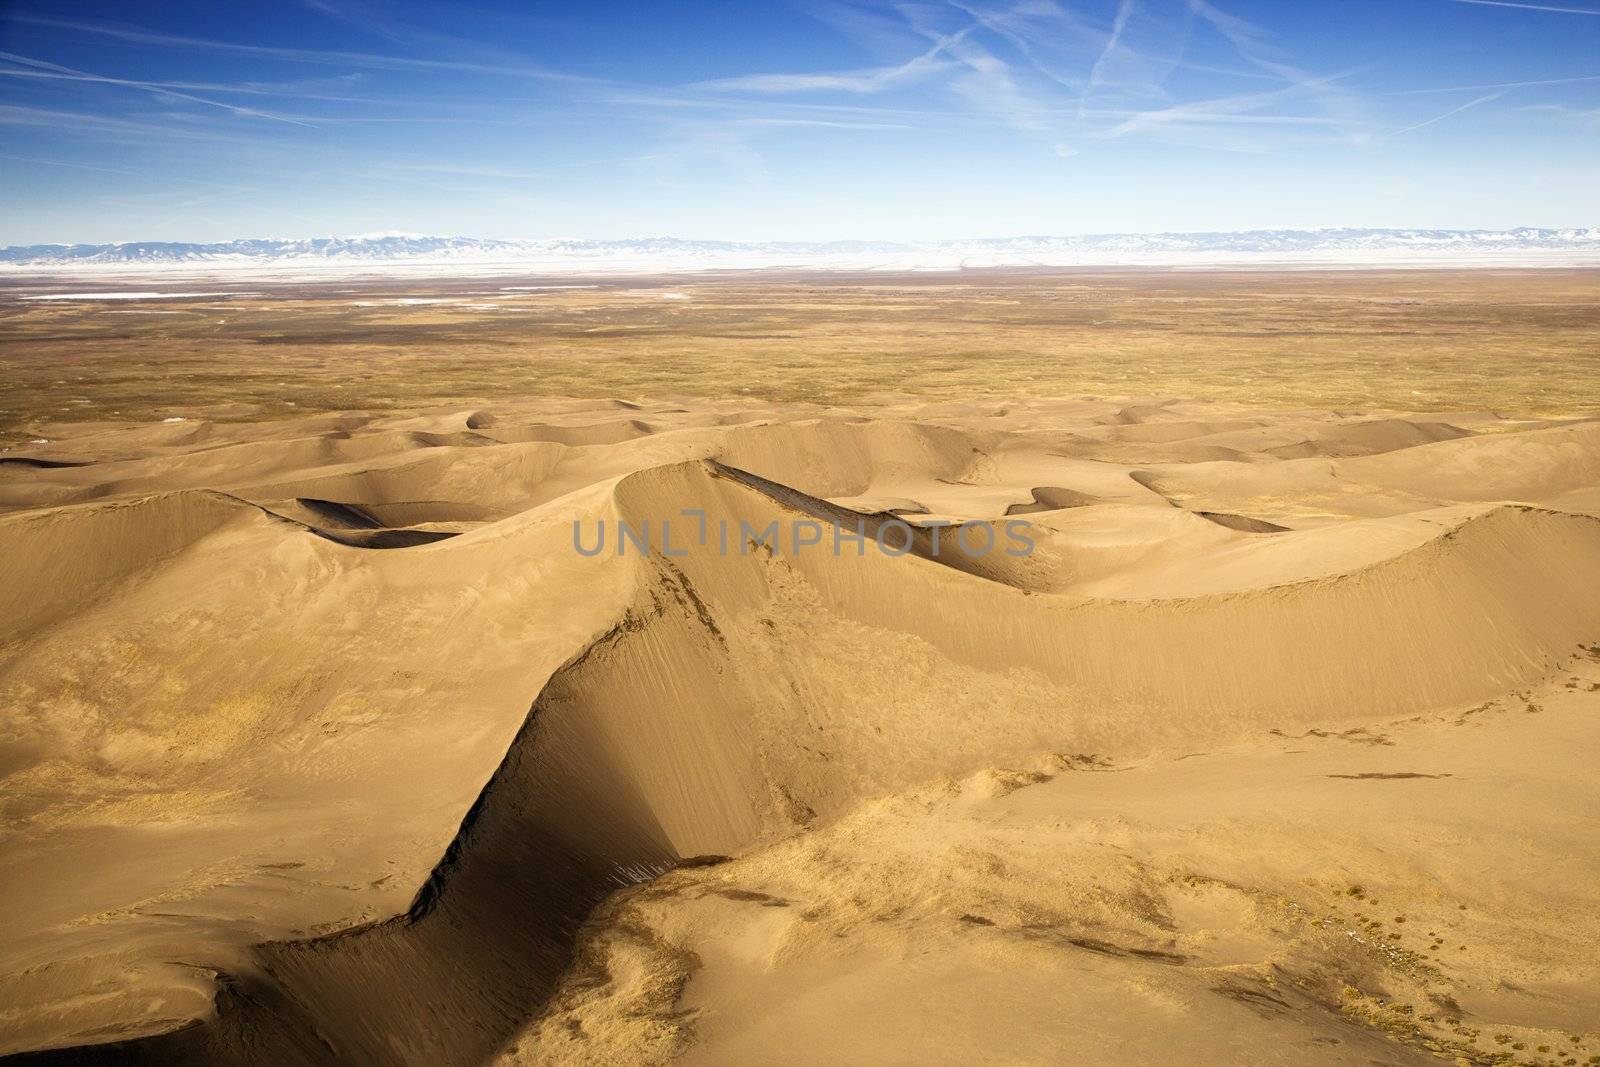 Scenic landscape of Great Sand Dunes National Park in Colorado, USA.